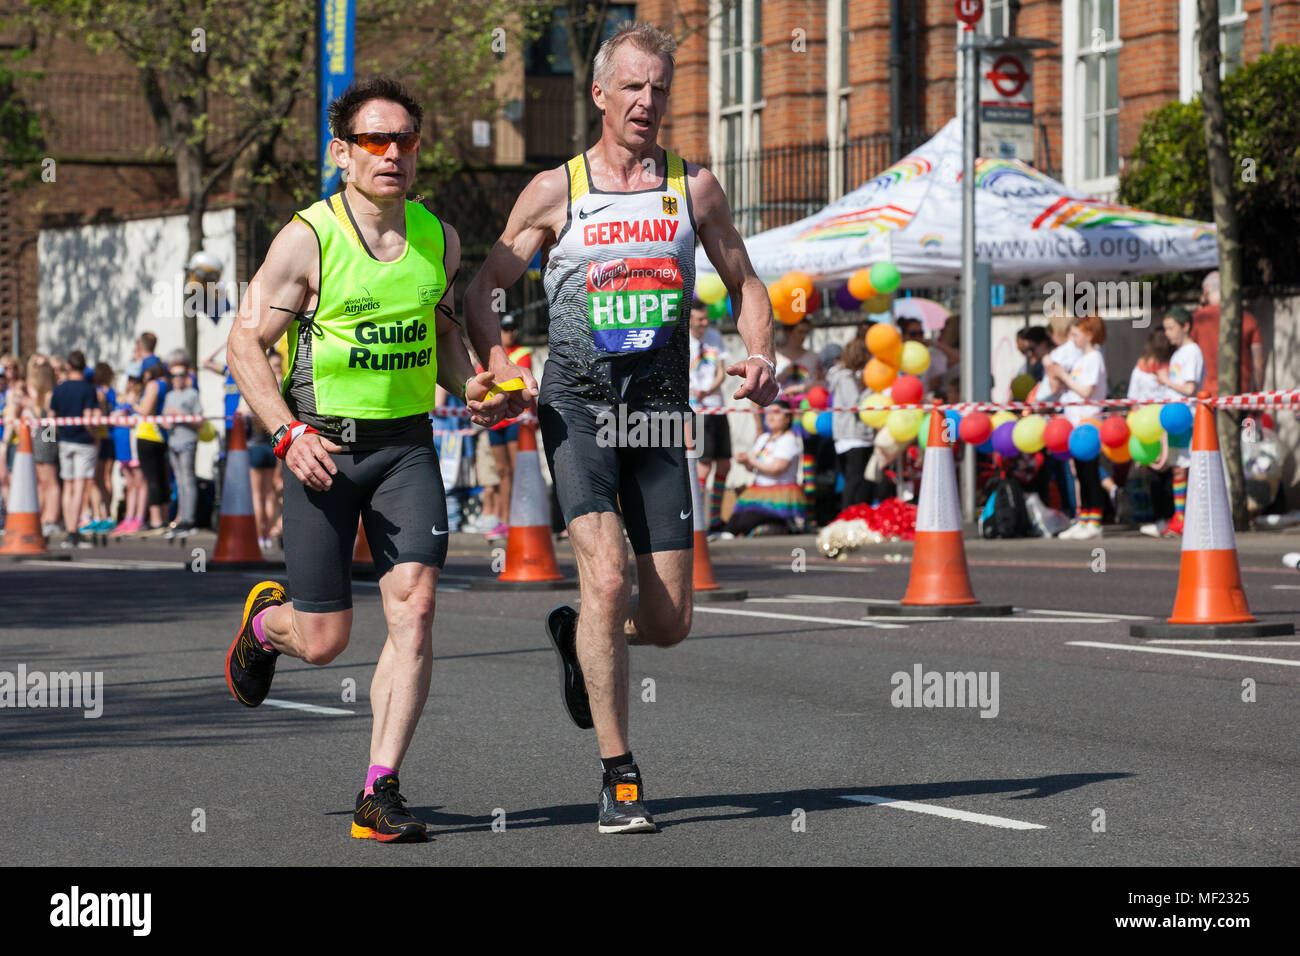 London, UK. 22nd April, 2018. Johannes-Reinhard Hupe of Germany competes in the World Para Athletics Marathon World Cup event at the 2018 Virgin Money London Marathon. The 38th edition of the race was the hottest on record with a temperature of 24.1C recorded in St James’s Park. Stock Photo